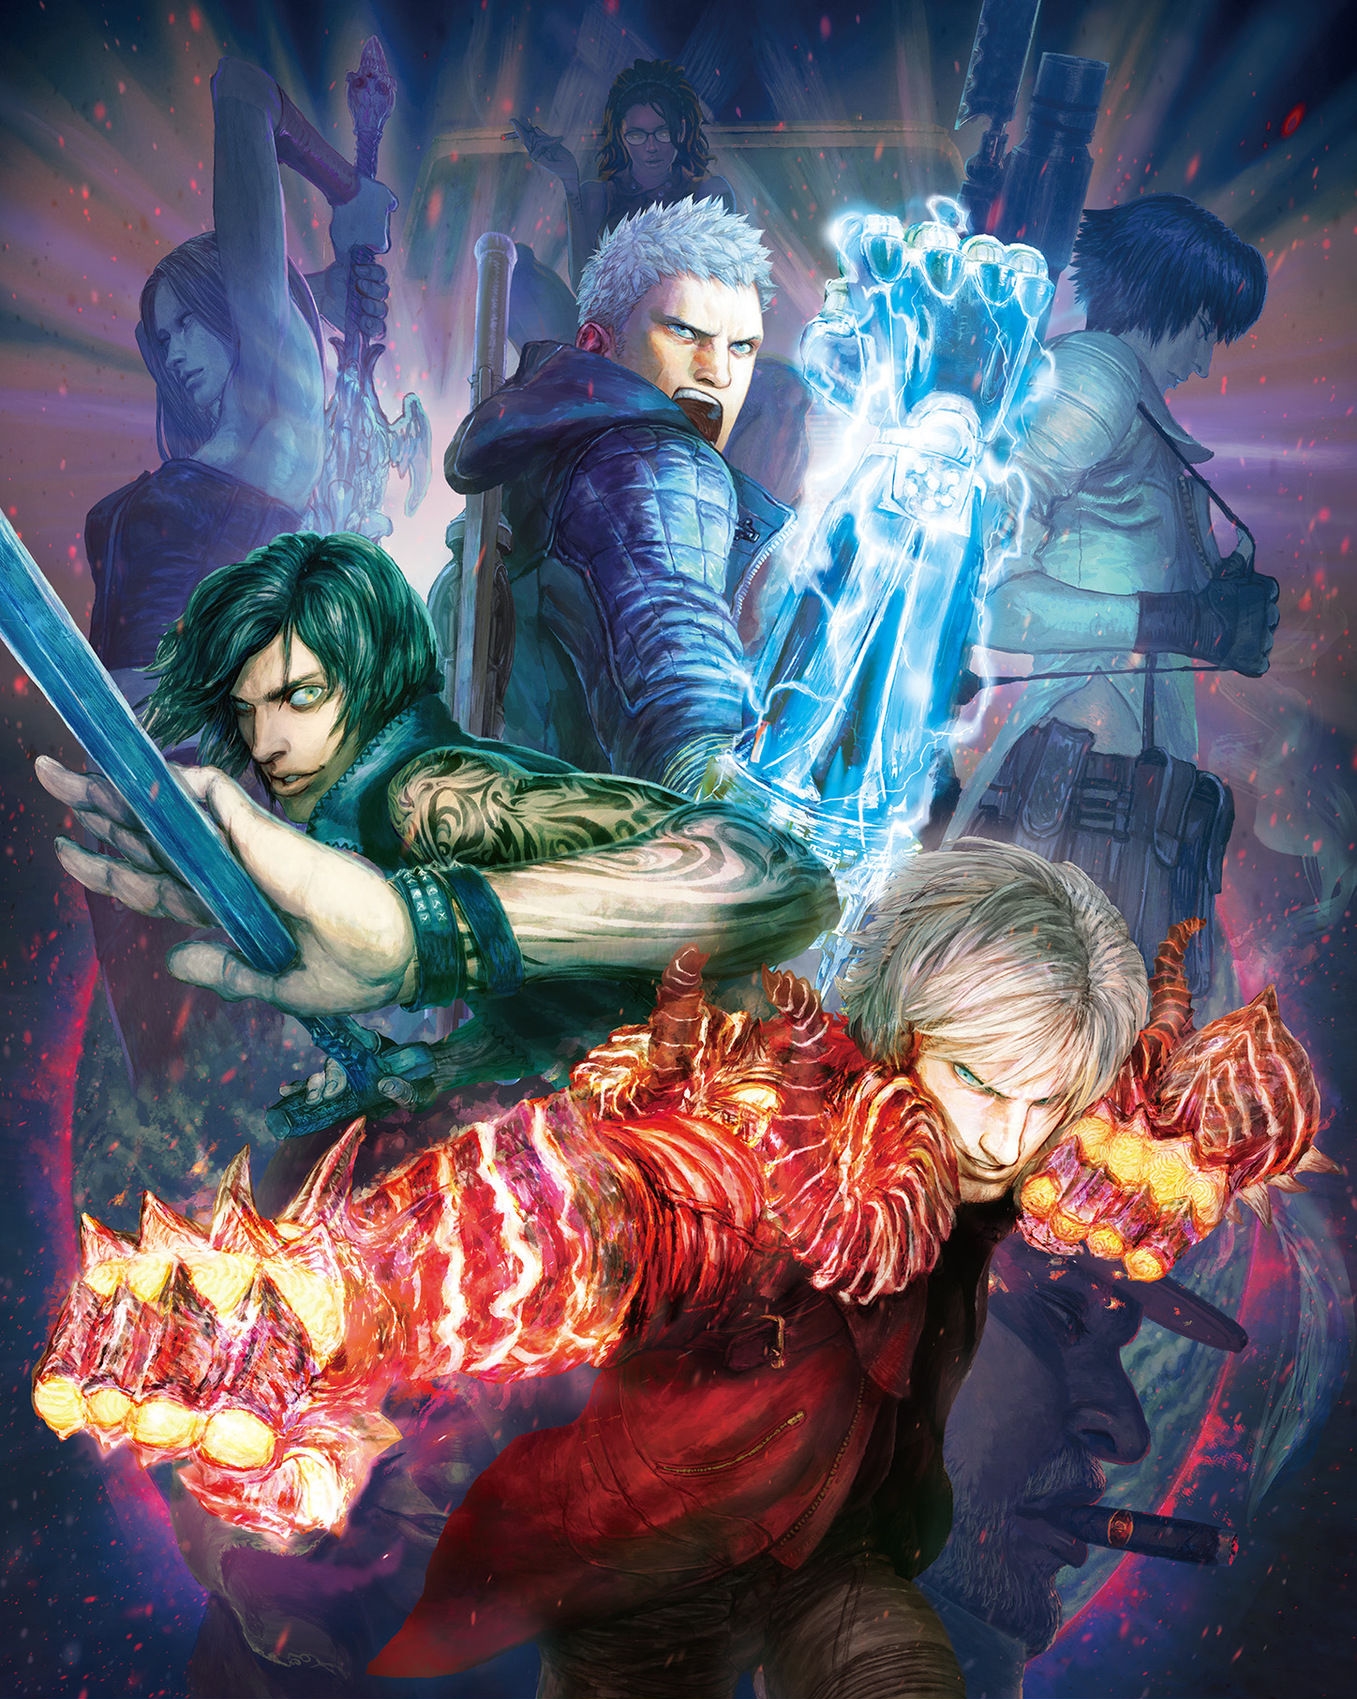 You need an S style rank to damage enemies with DmC: Definitive Edition's  Must Style modifier